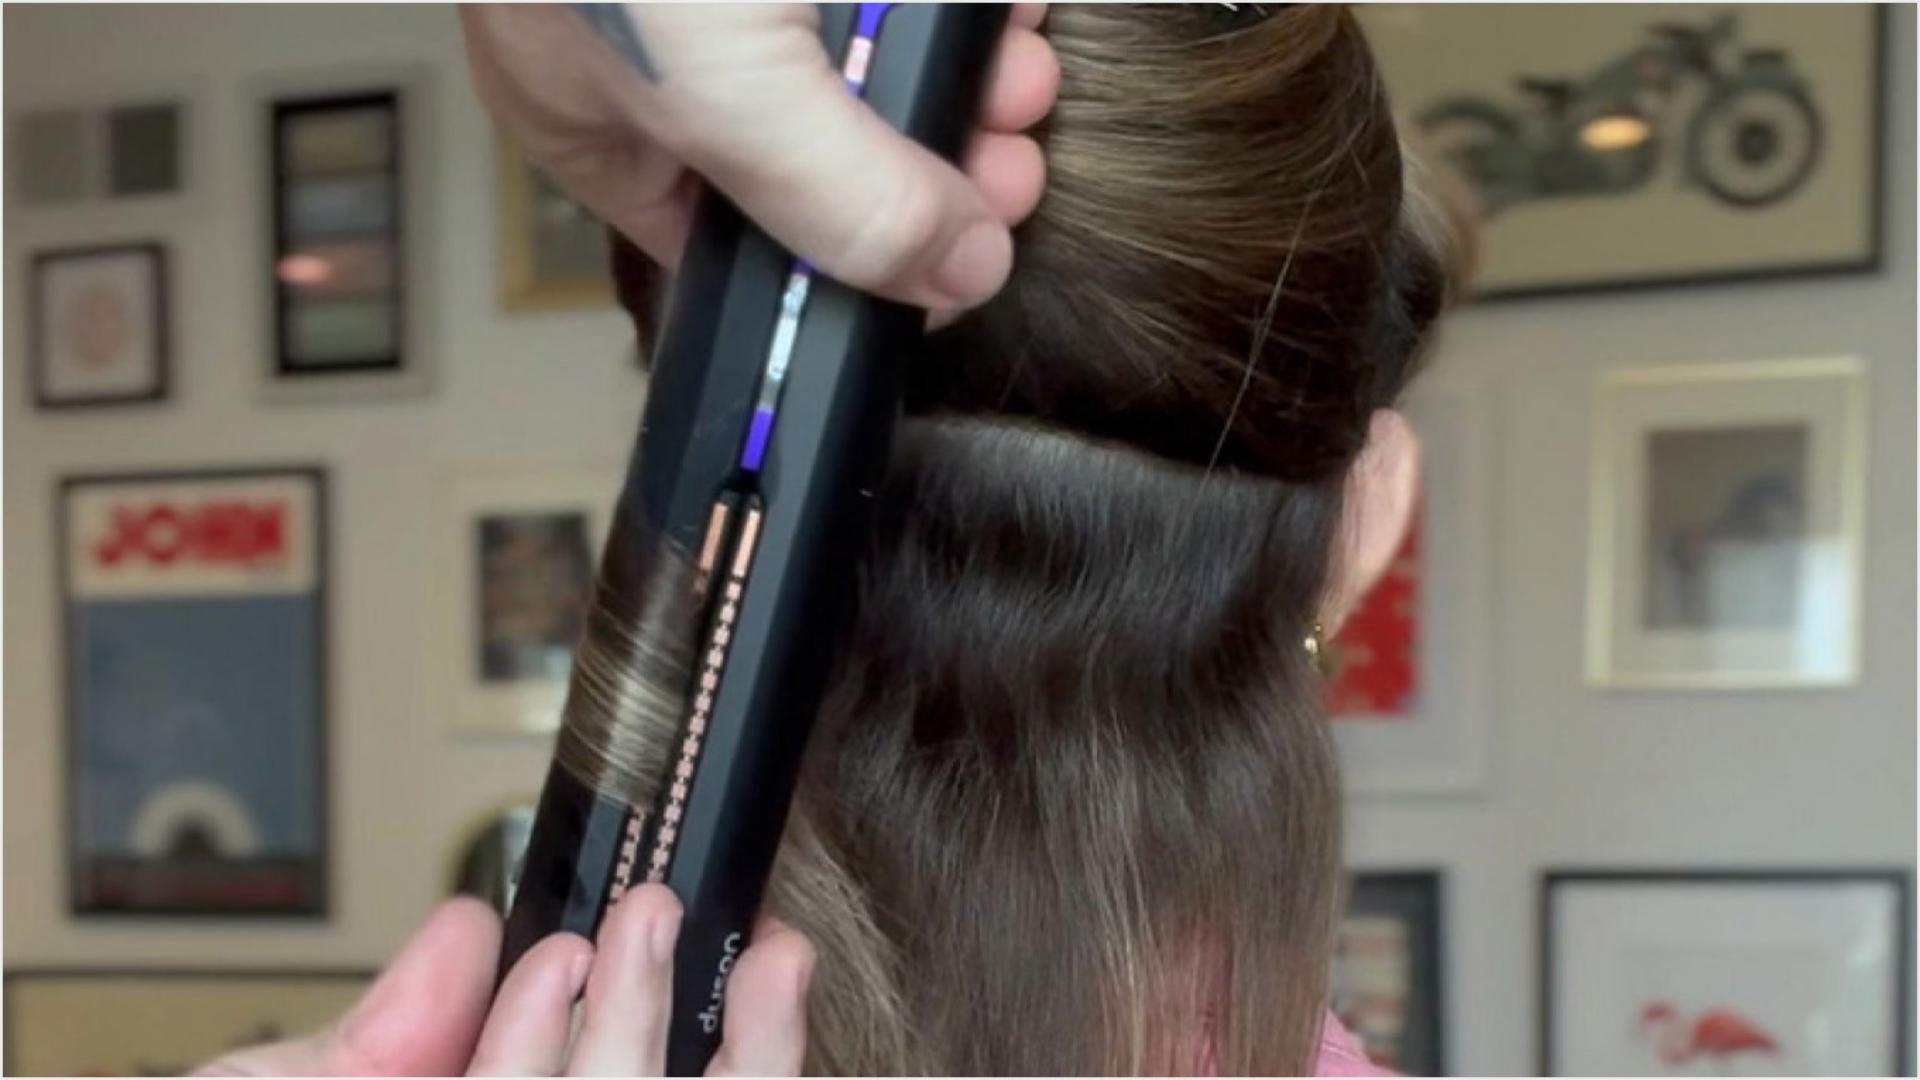 Leading stylist Matthew gives tips on how to use the Dyson Corrale straightener to create casual waves